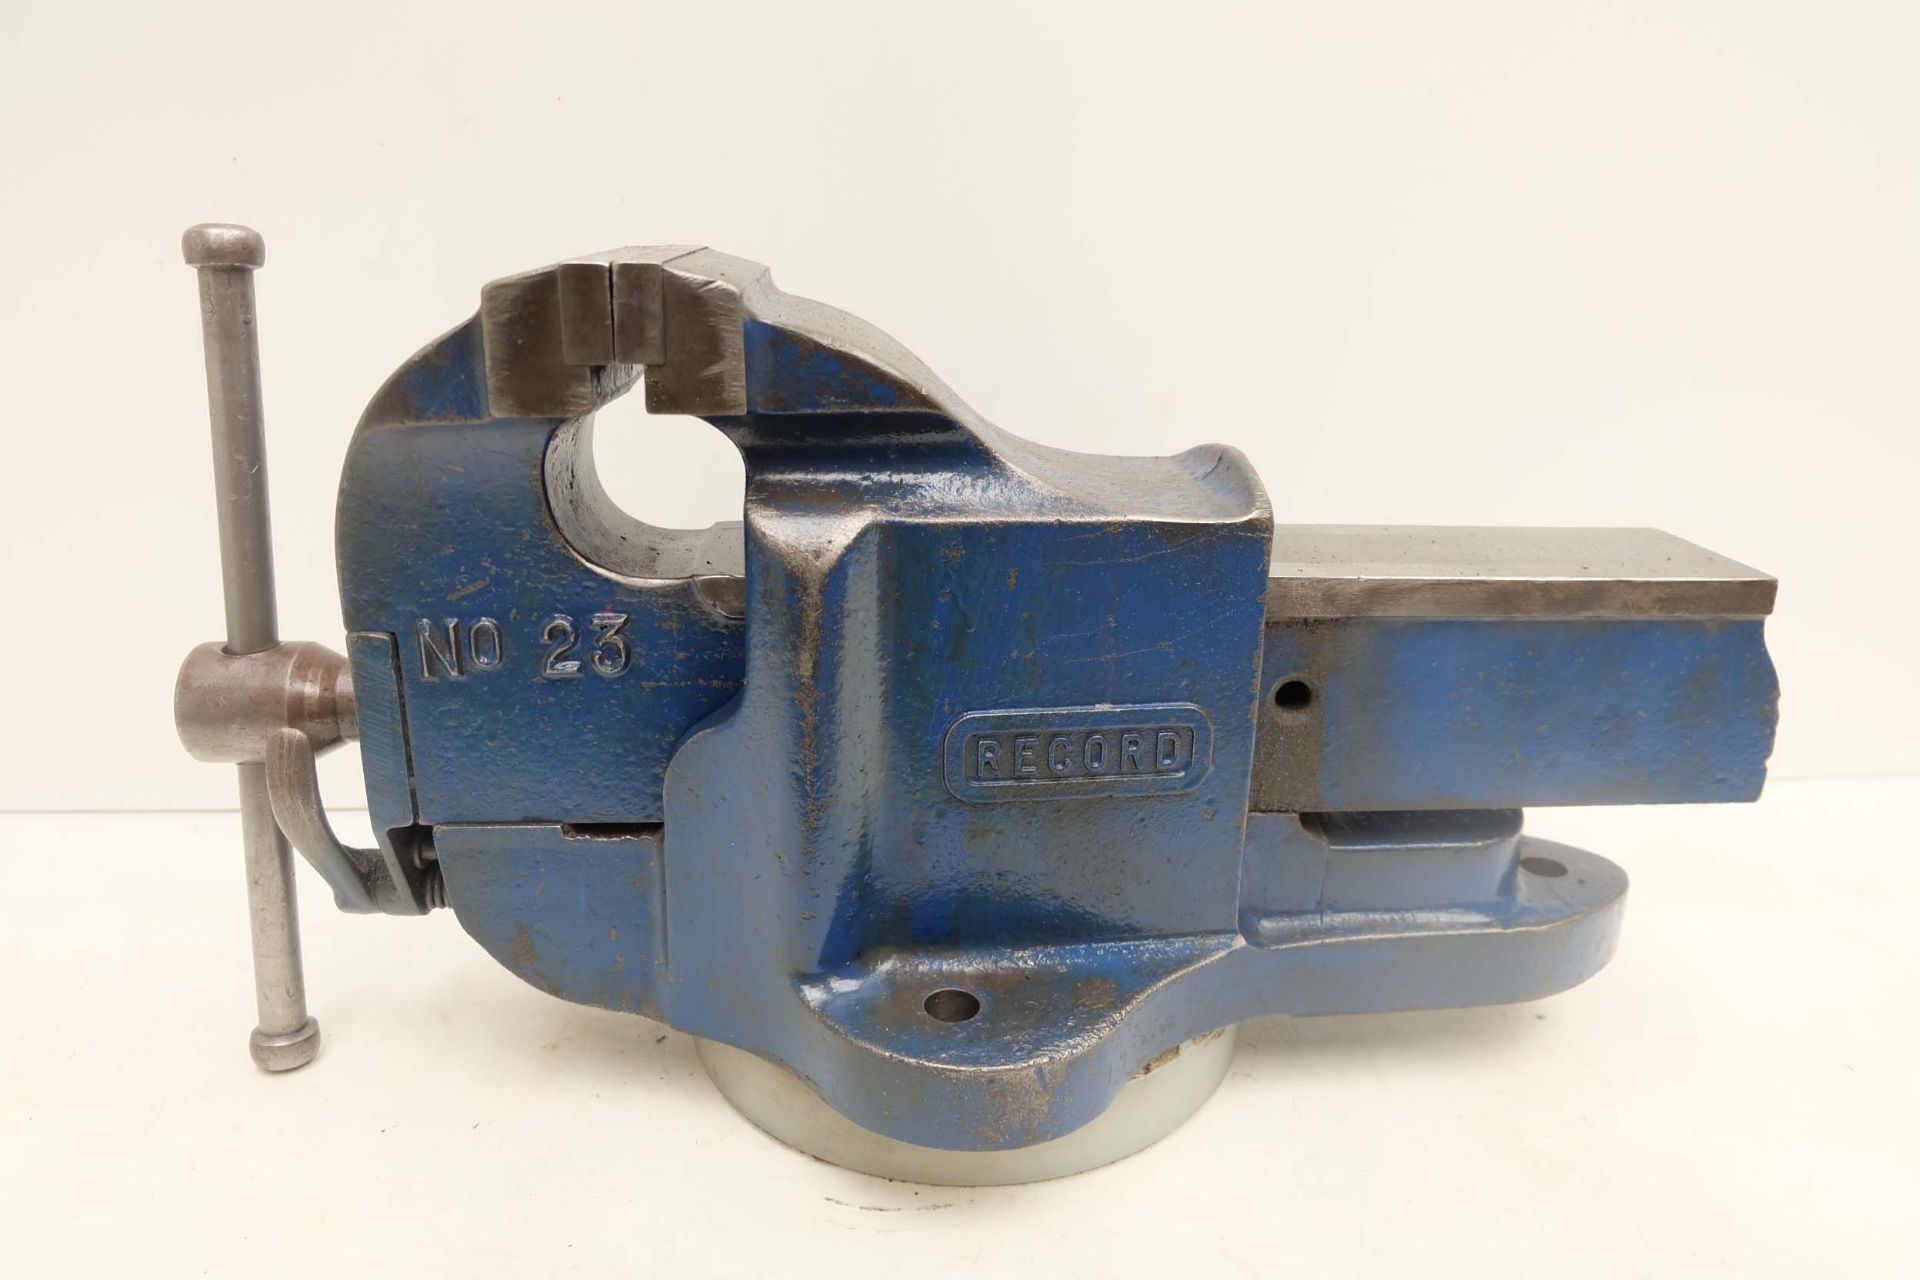 Record No.23 Bench Vice With Quick Release. Width of Jaws 4 1/4". Max Opening 6 1/4".